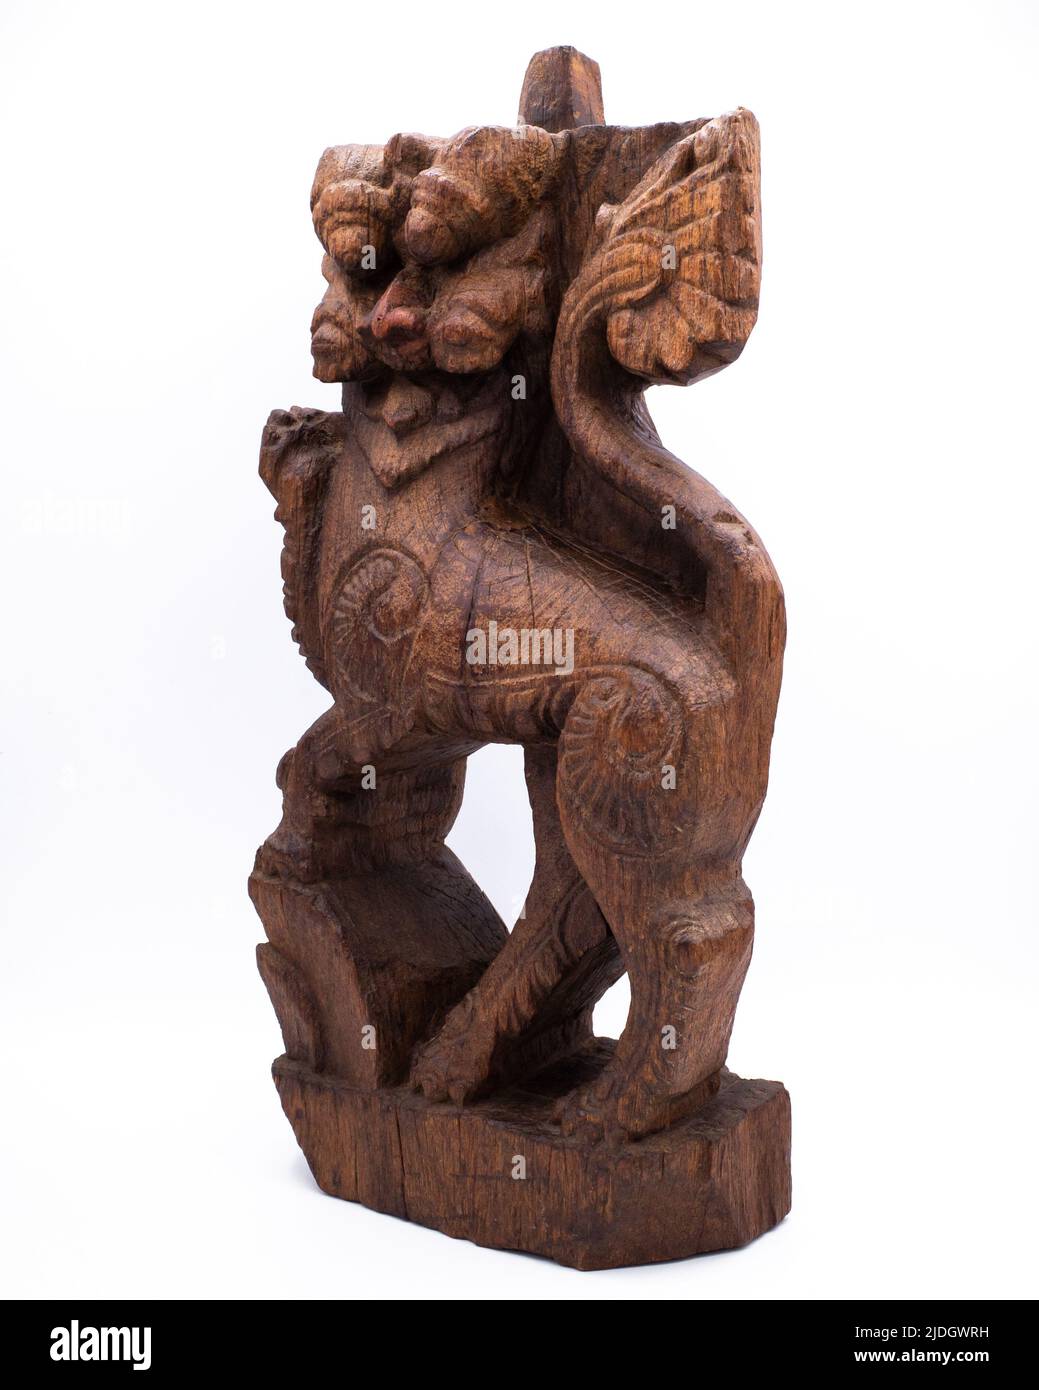 Large Antique Indian Wood Carving of Hindu Mythical Lion Yali. 18th – 19th century Stock Photo